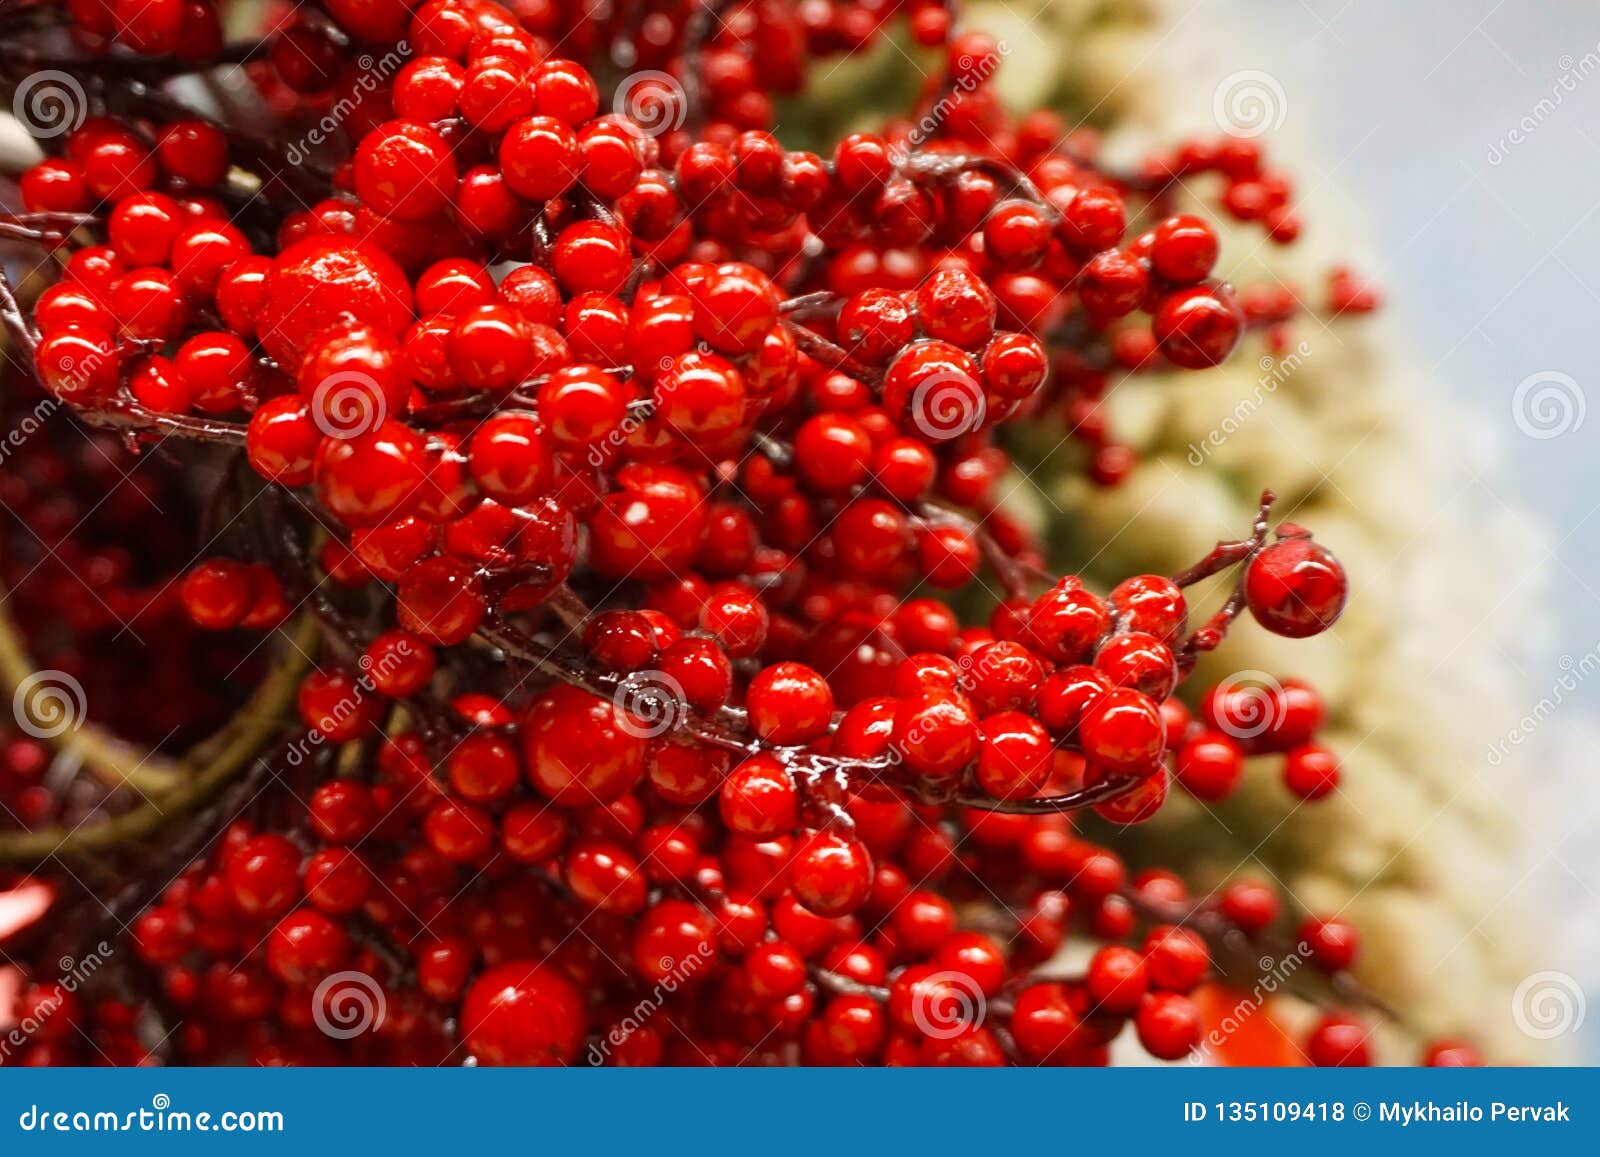 red berries as background for hollidays